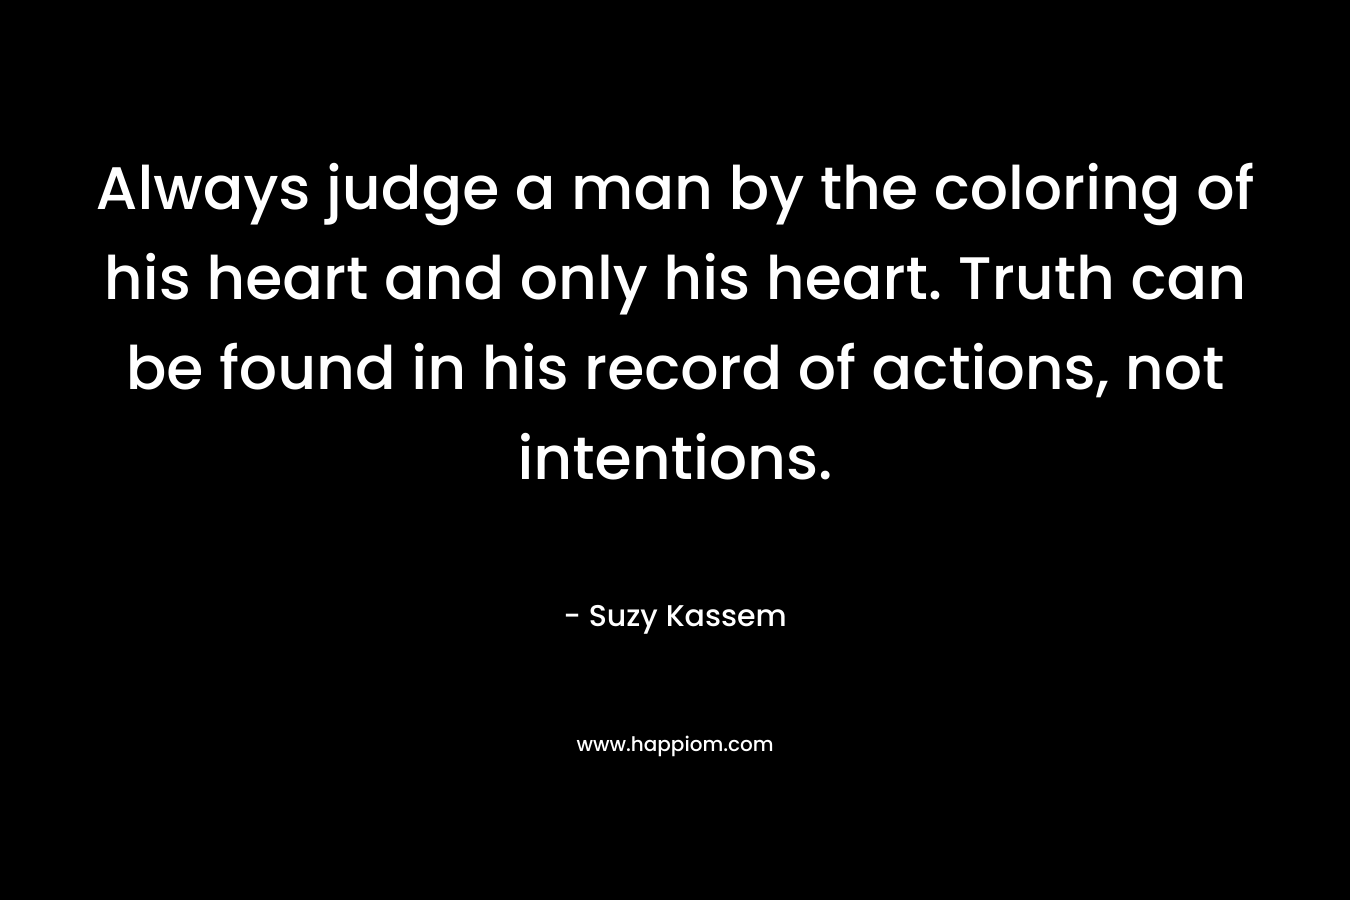 Always judge a man by the coloring of his heart and only his heart. Truth can be found in his record of actions, not intentions.